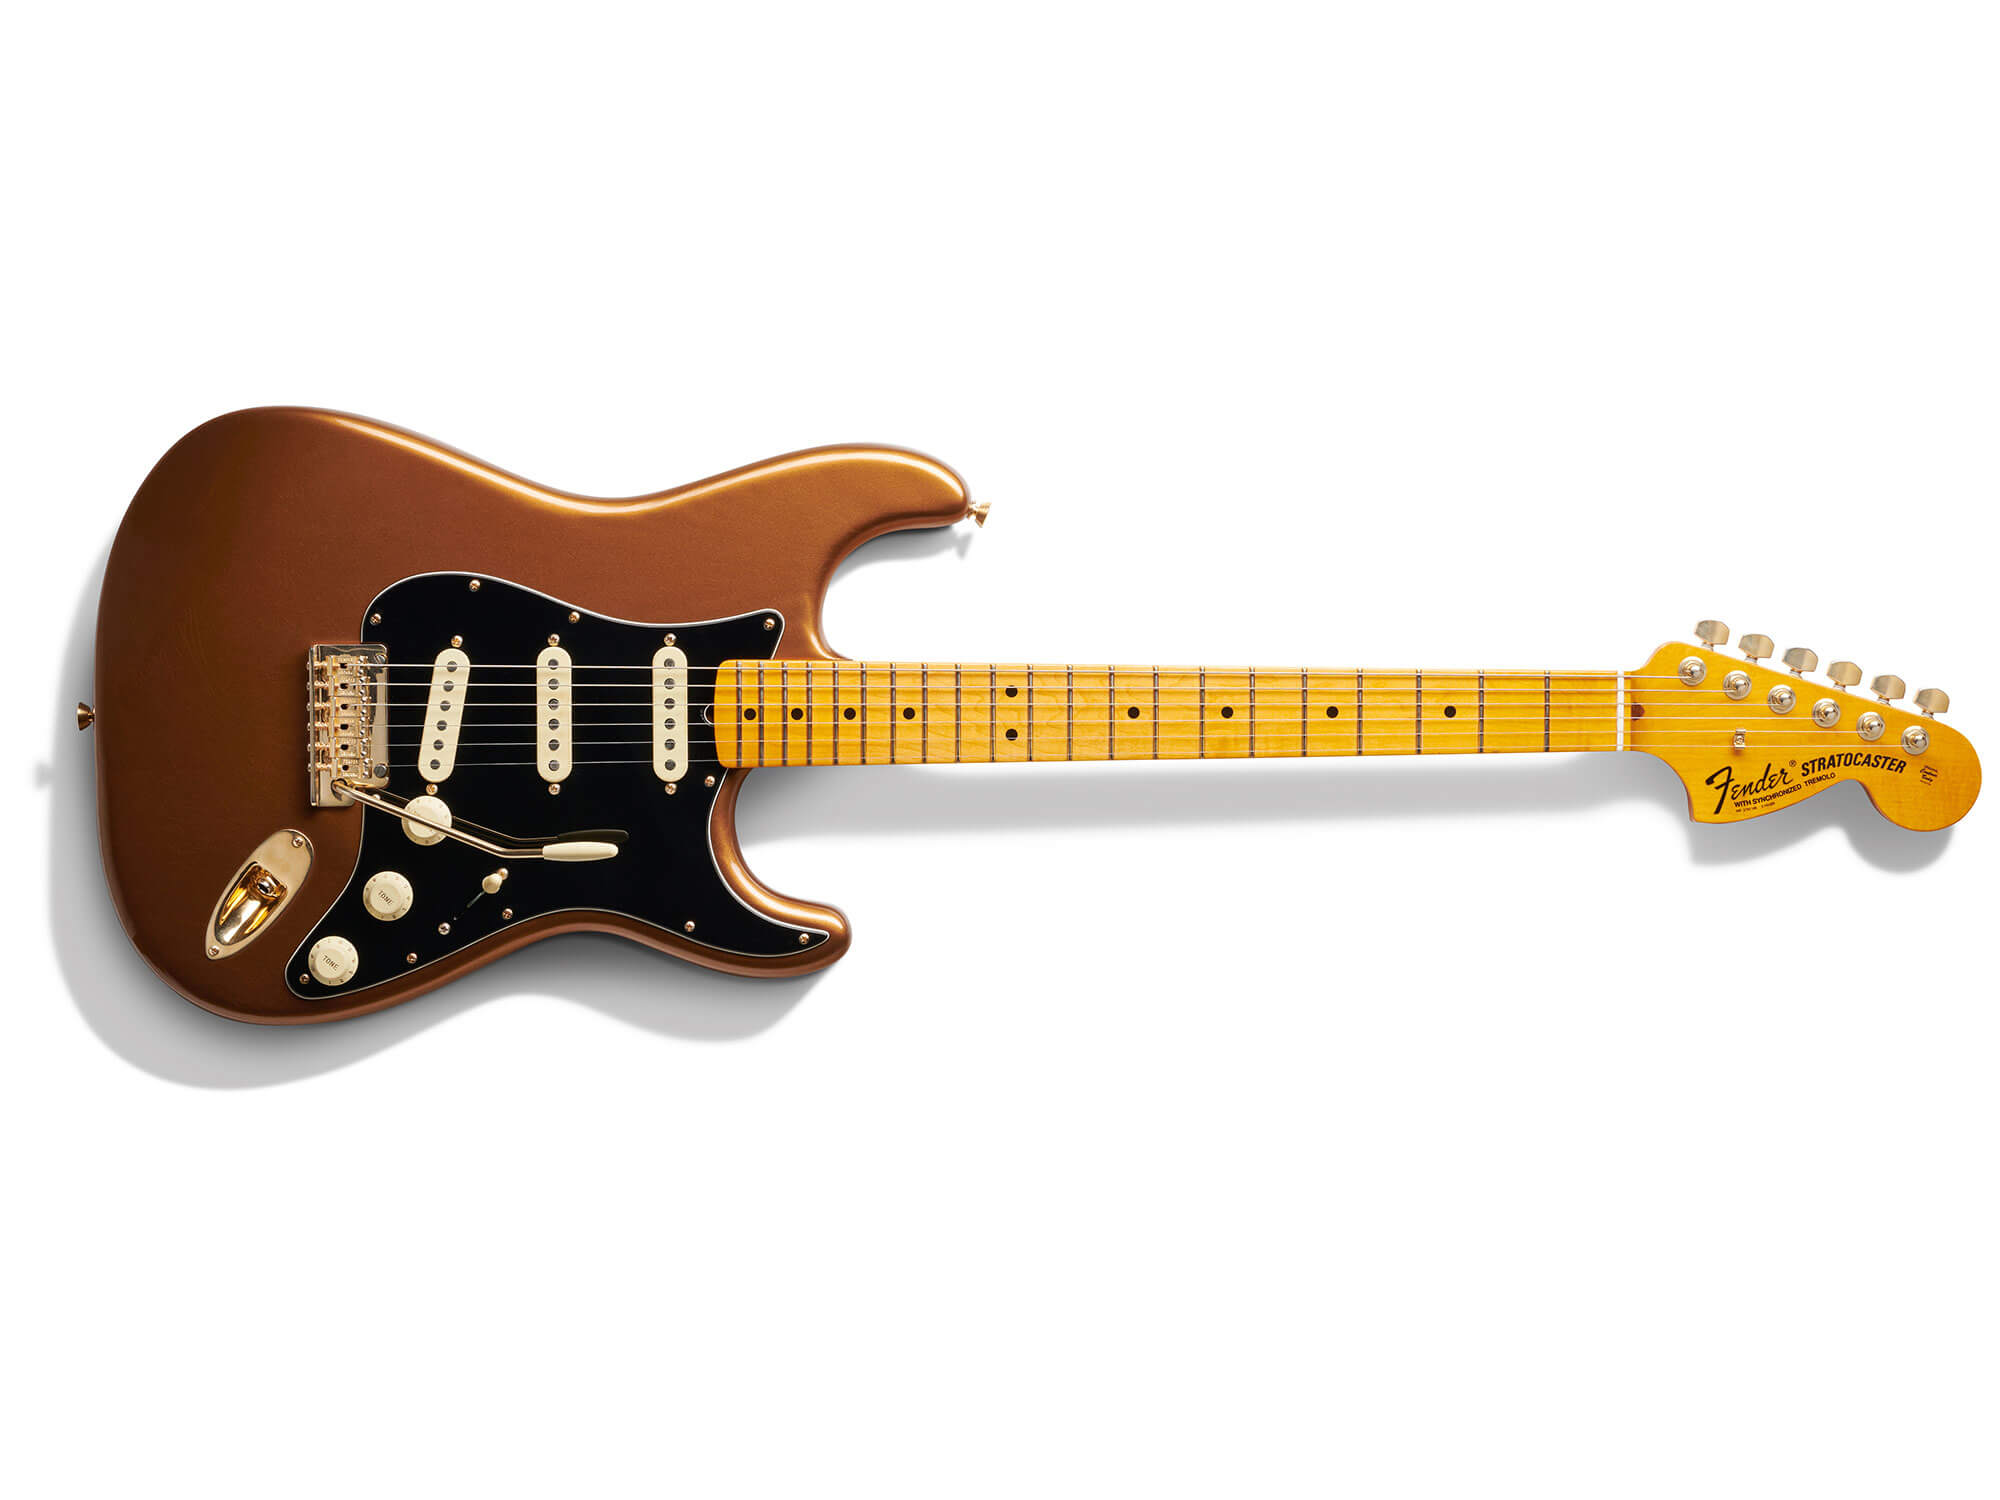 Fender launches Bruno Mars' first-ever signature guitar, the Bruno Mars  Stratocaster